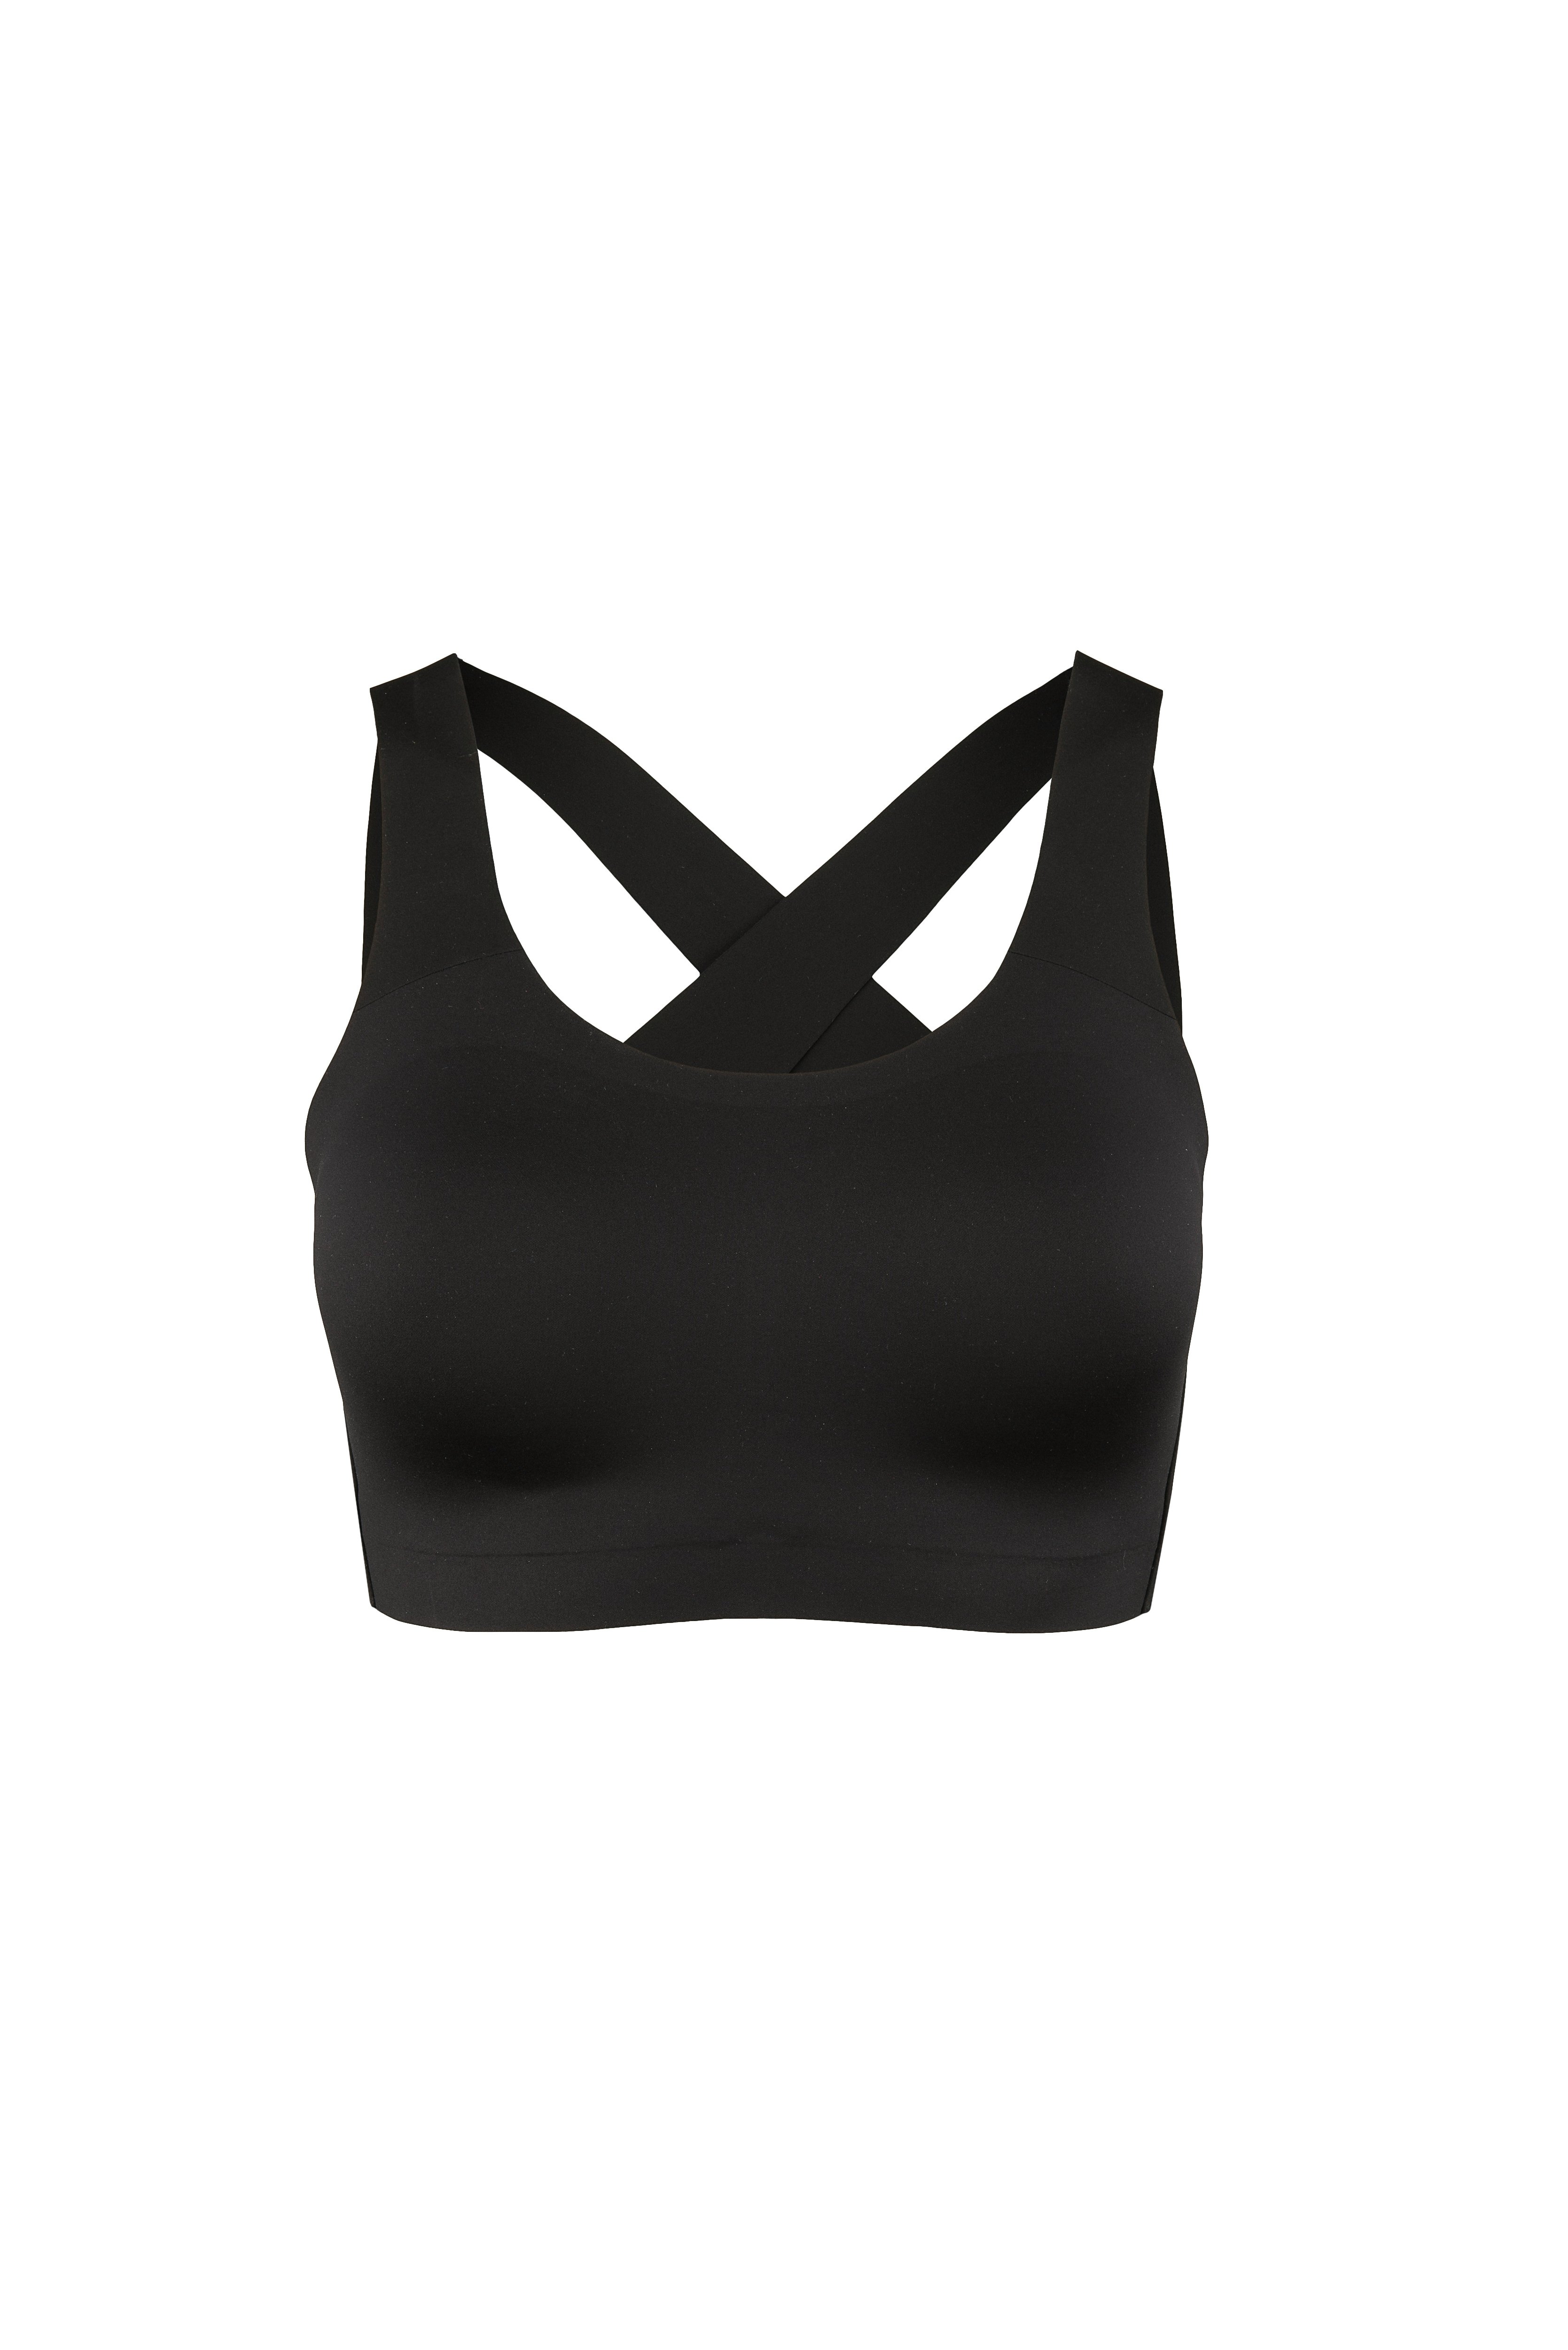 Lululemon's New Enlite Sports Bra Is Probably Unlike Any Bra You've Ever  Worked Out In